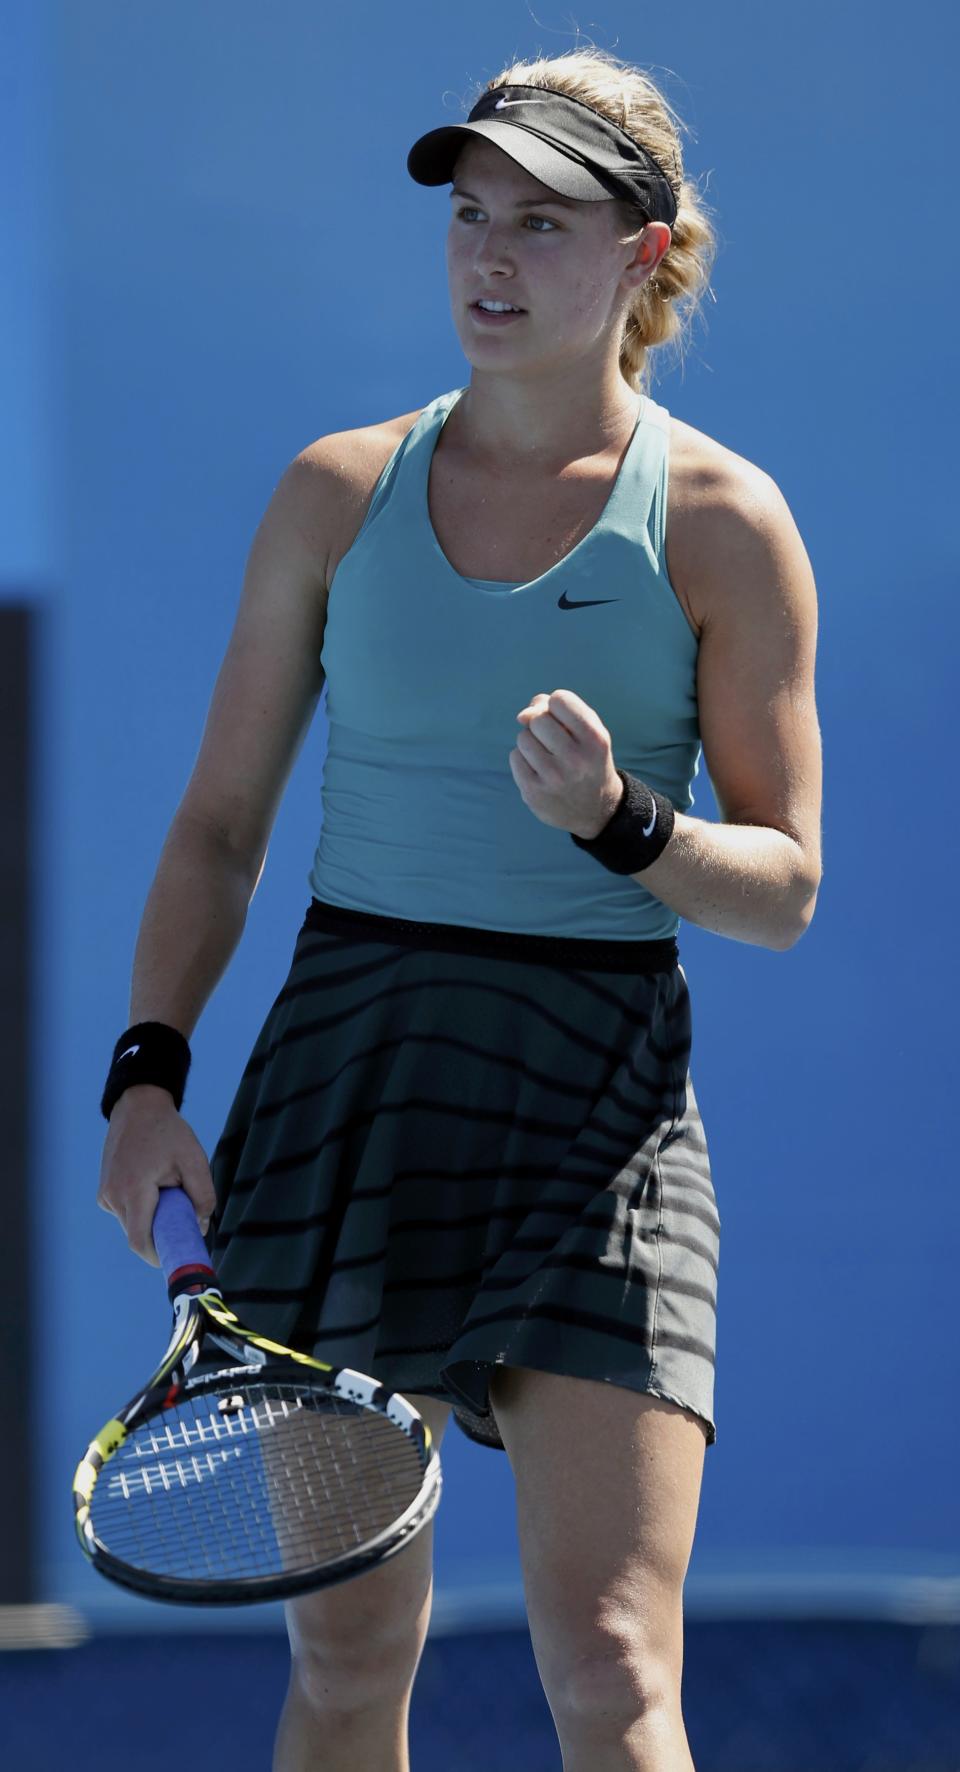 Eugenie Bouchard of Canada celebrates defeating Tang Haochen of China in their women's singles match at the Australian Open 2014 tennis tournament in Melbourne January 13, 2014. REUTERS/Brandon Malone (AUSTRALIA - Tags: SPORT TENNIS)